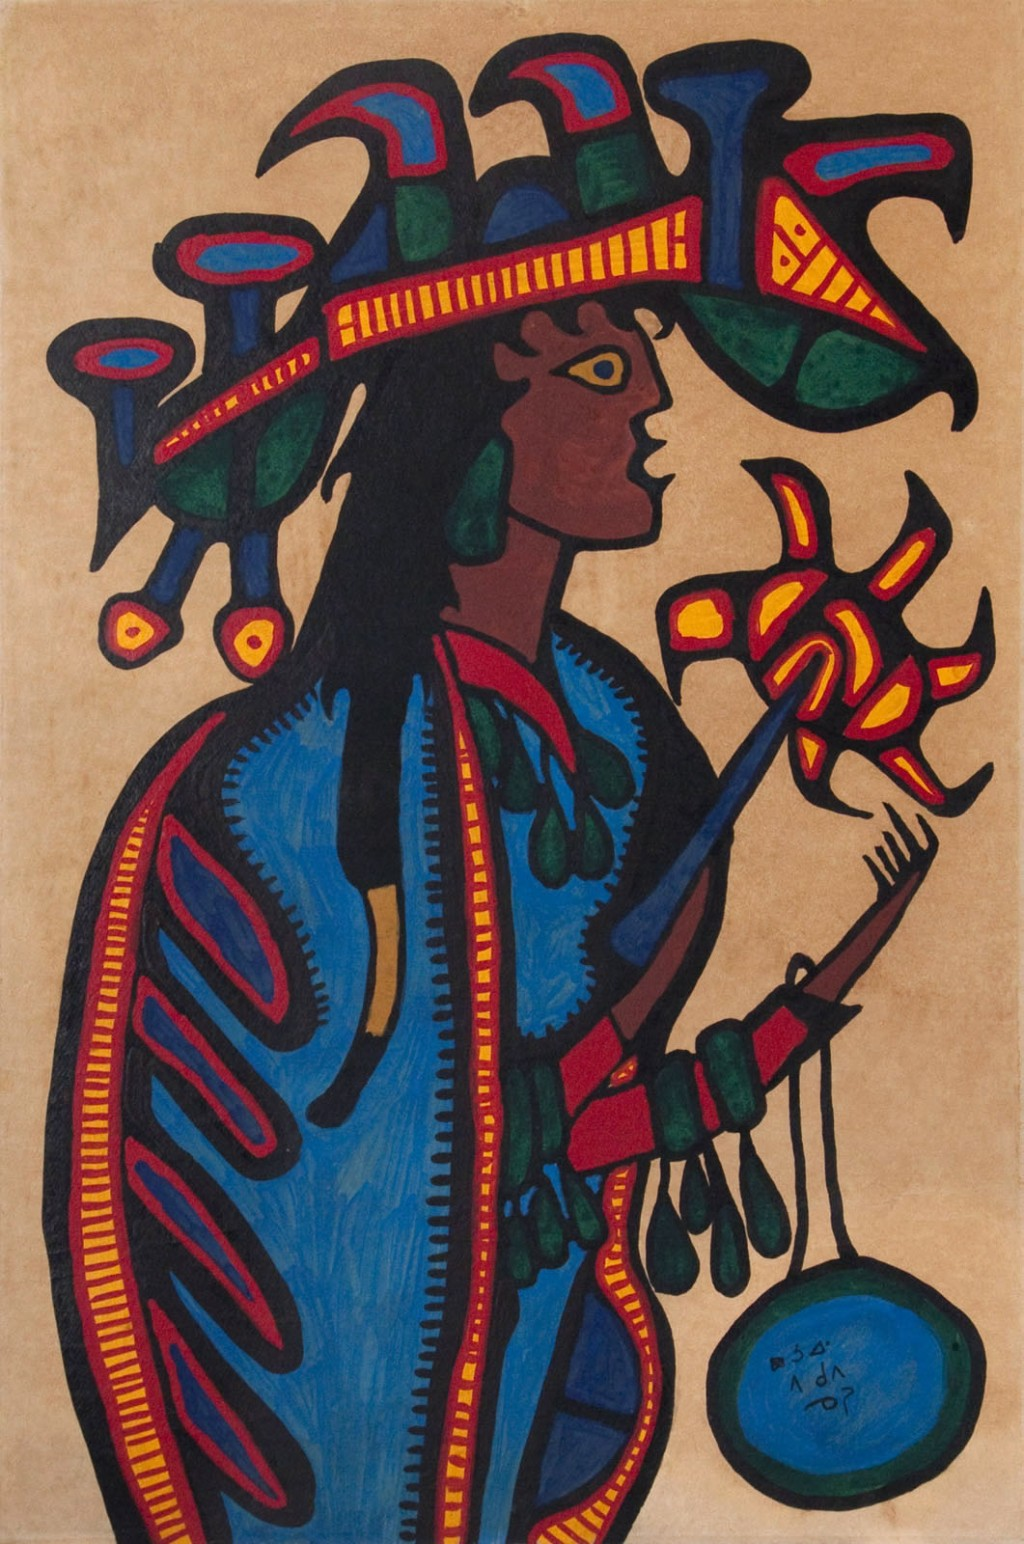 A portrait painting of an ancestral figure